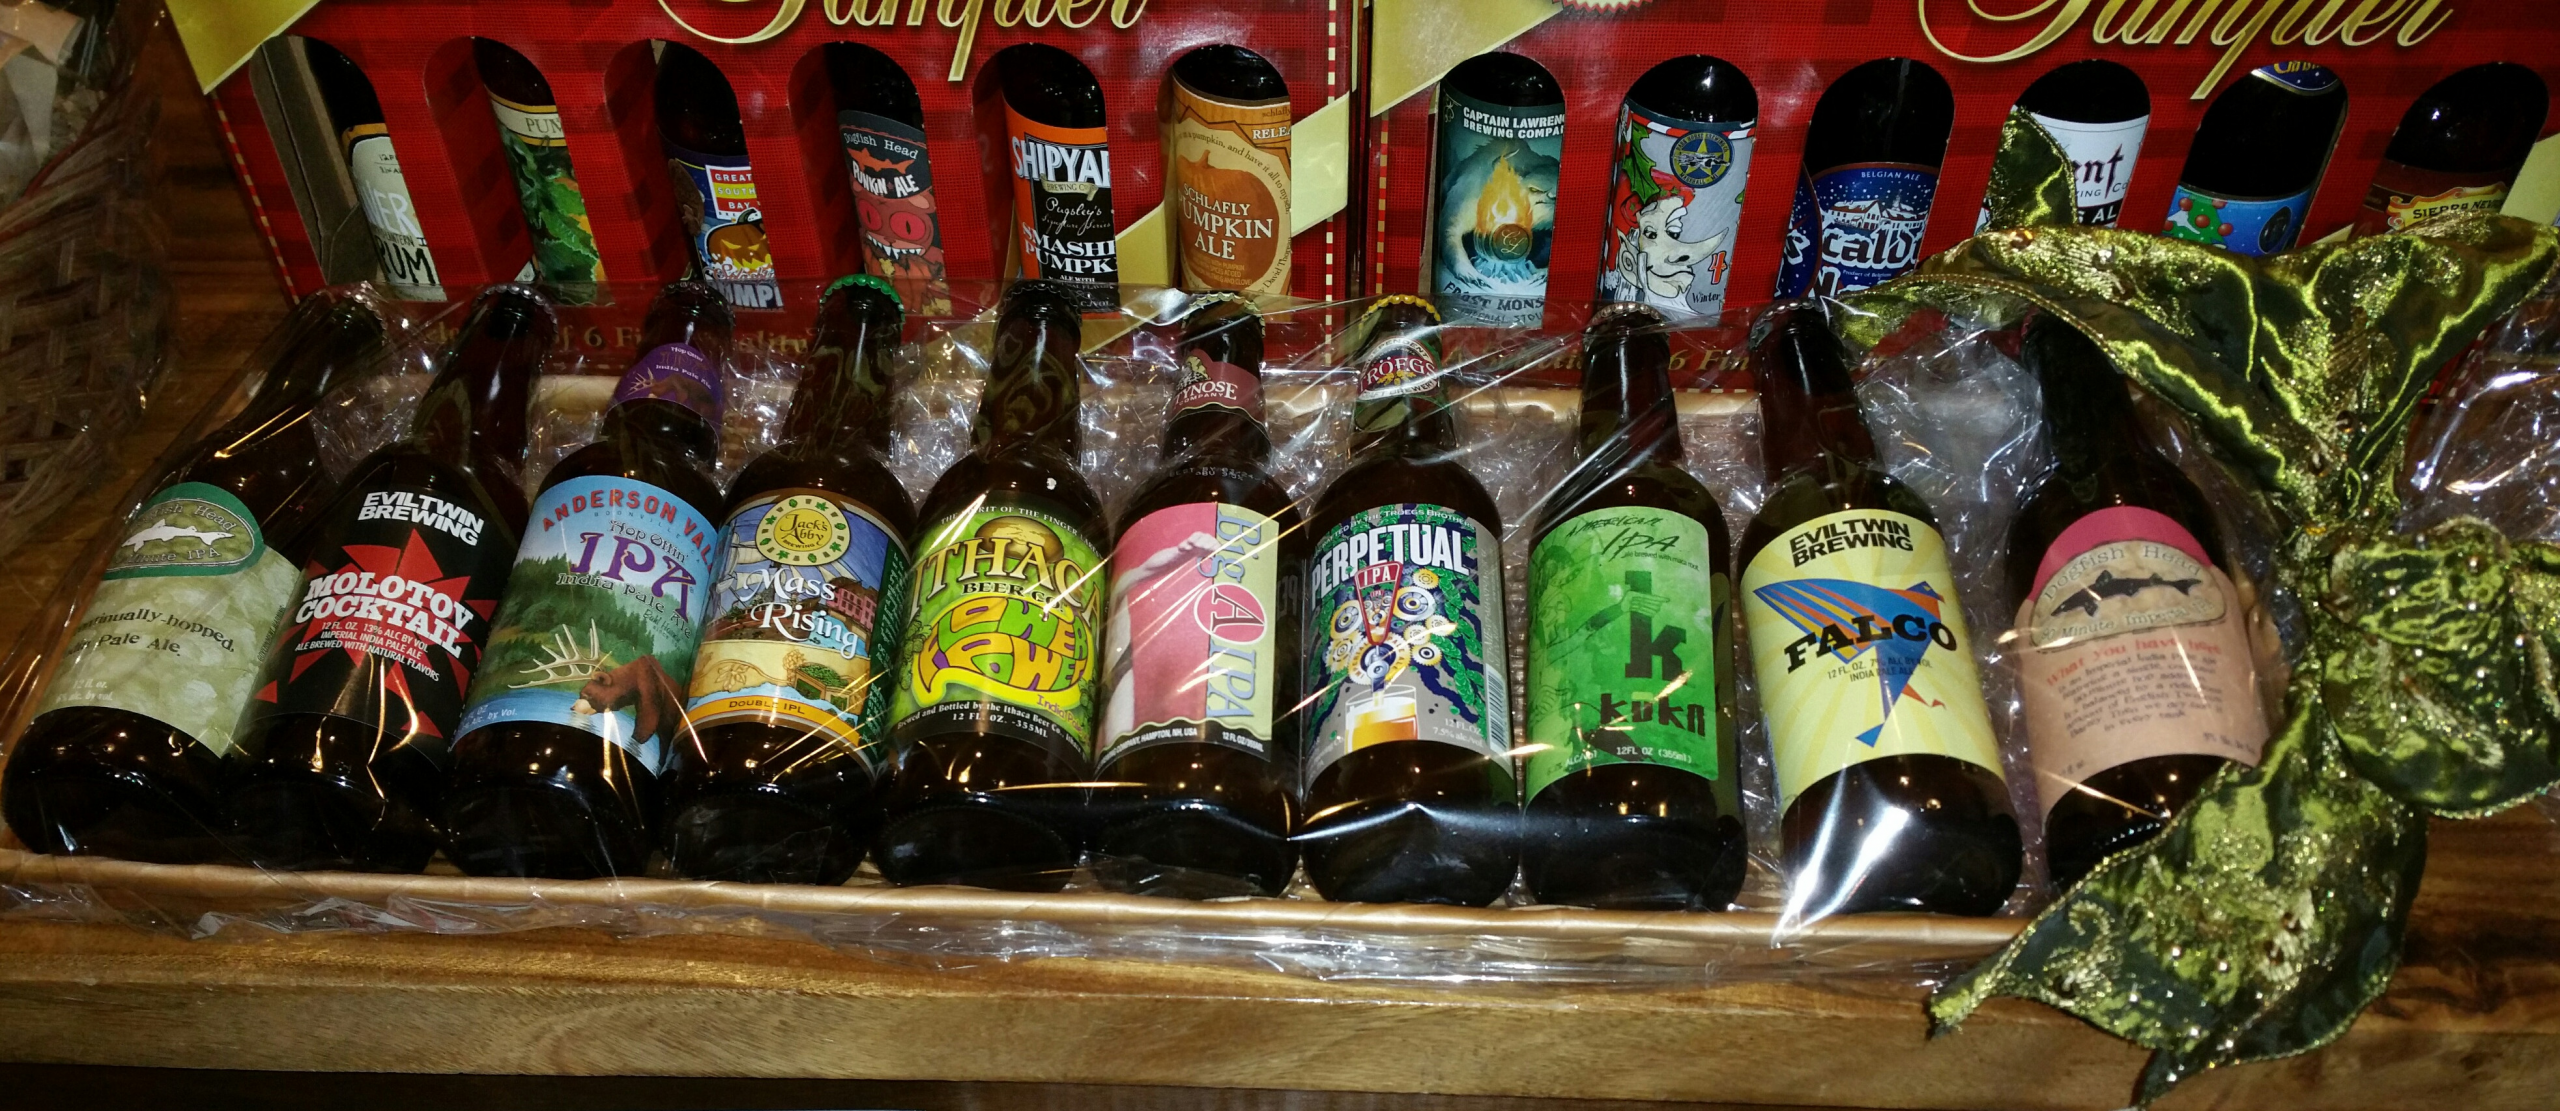 Beer Gift Baskets Ideas
 Craft Beer Gift Baskets for Beer Lovers Growler & Gill